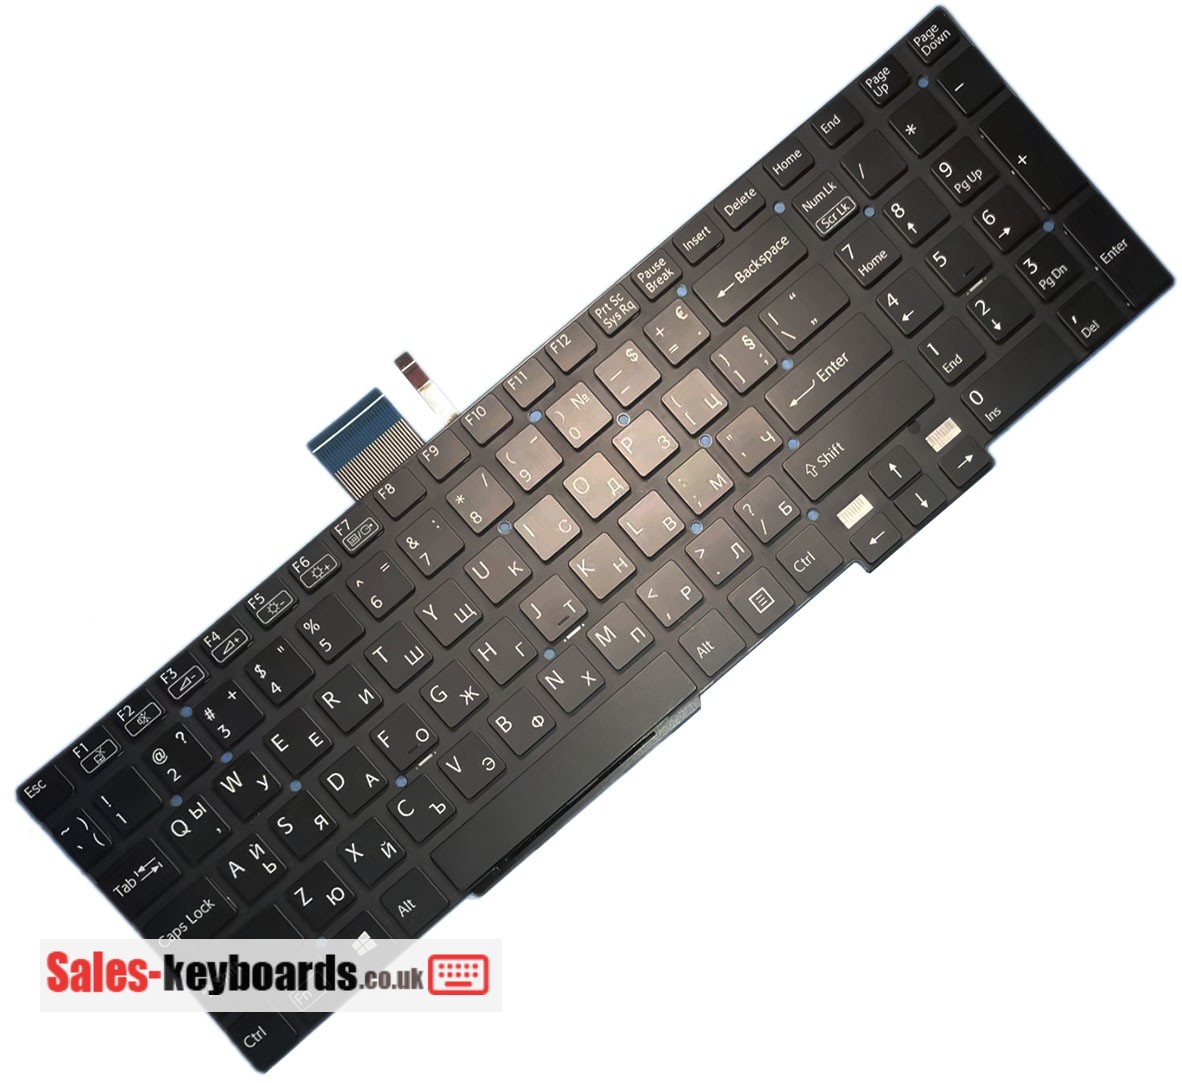 Sony VAIO SVT1511CXS Keyboard replacement